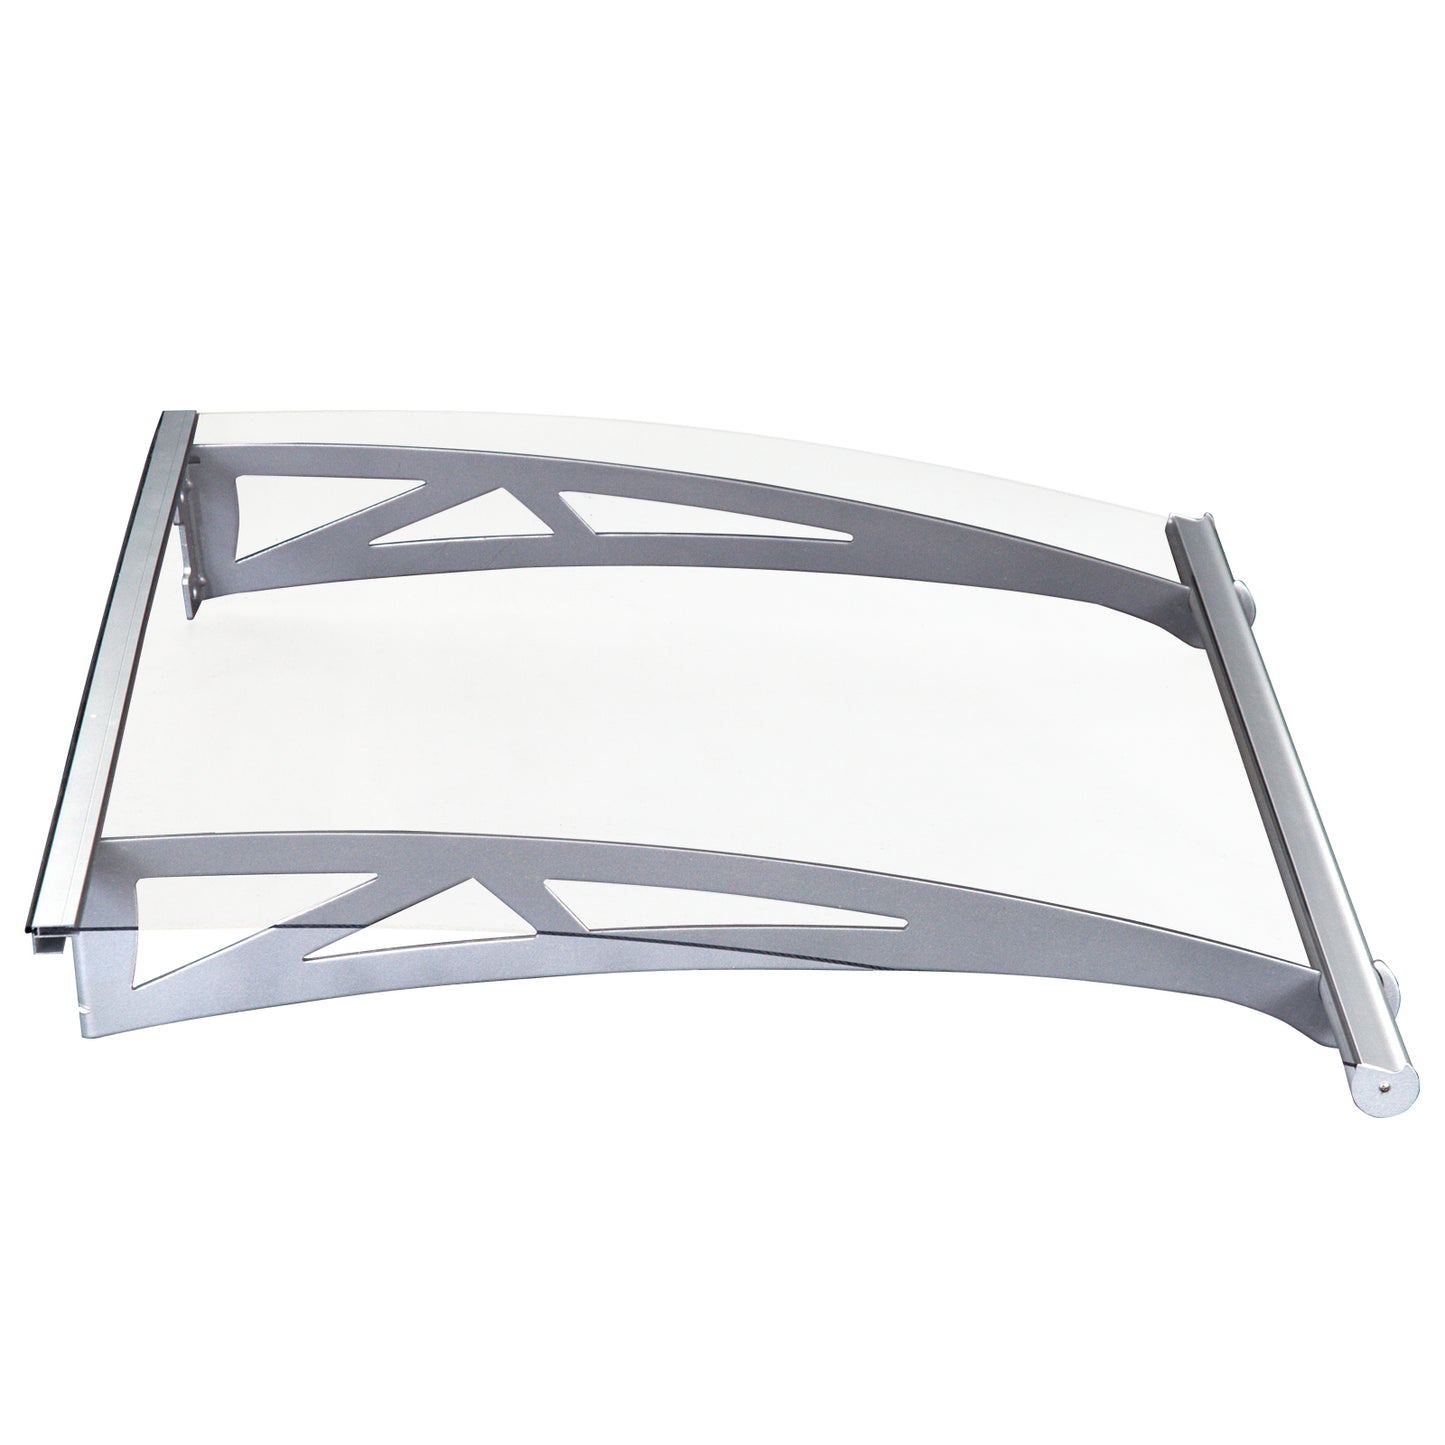 Outsunny Polycarbonate Door Canopy Awning 20Wx90L cm-Transparent/Silver